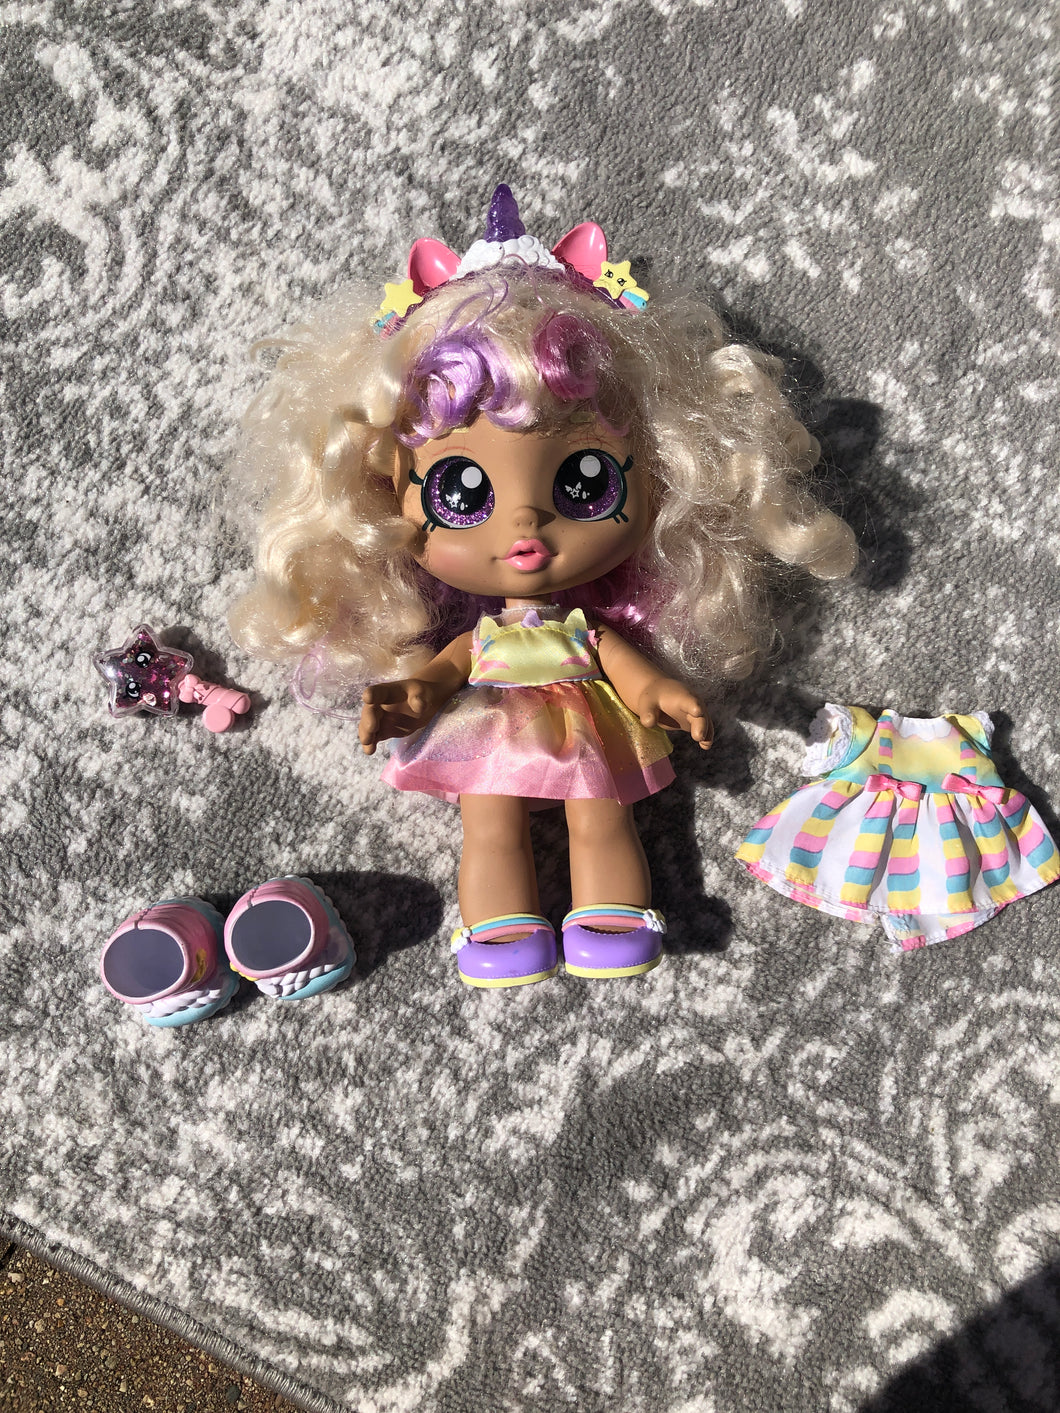 Kindi Kids bobble head doll- with extra outfit, boots and magic wand filled with glitter